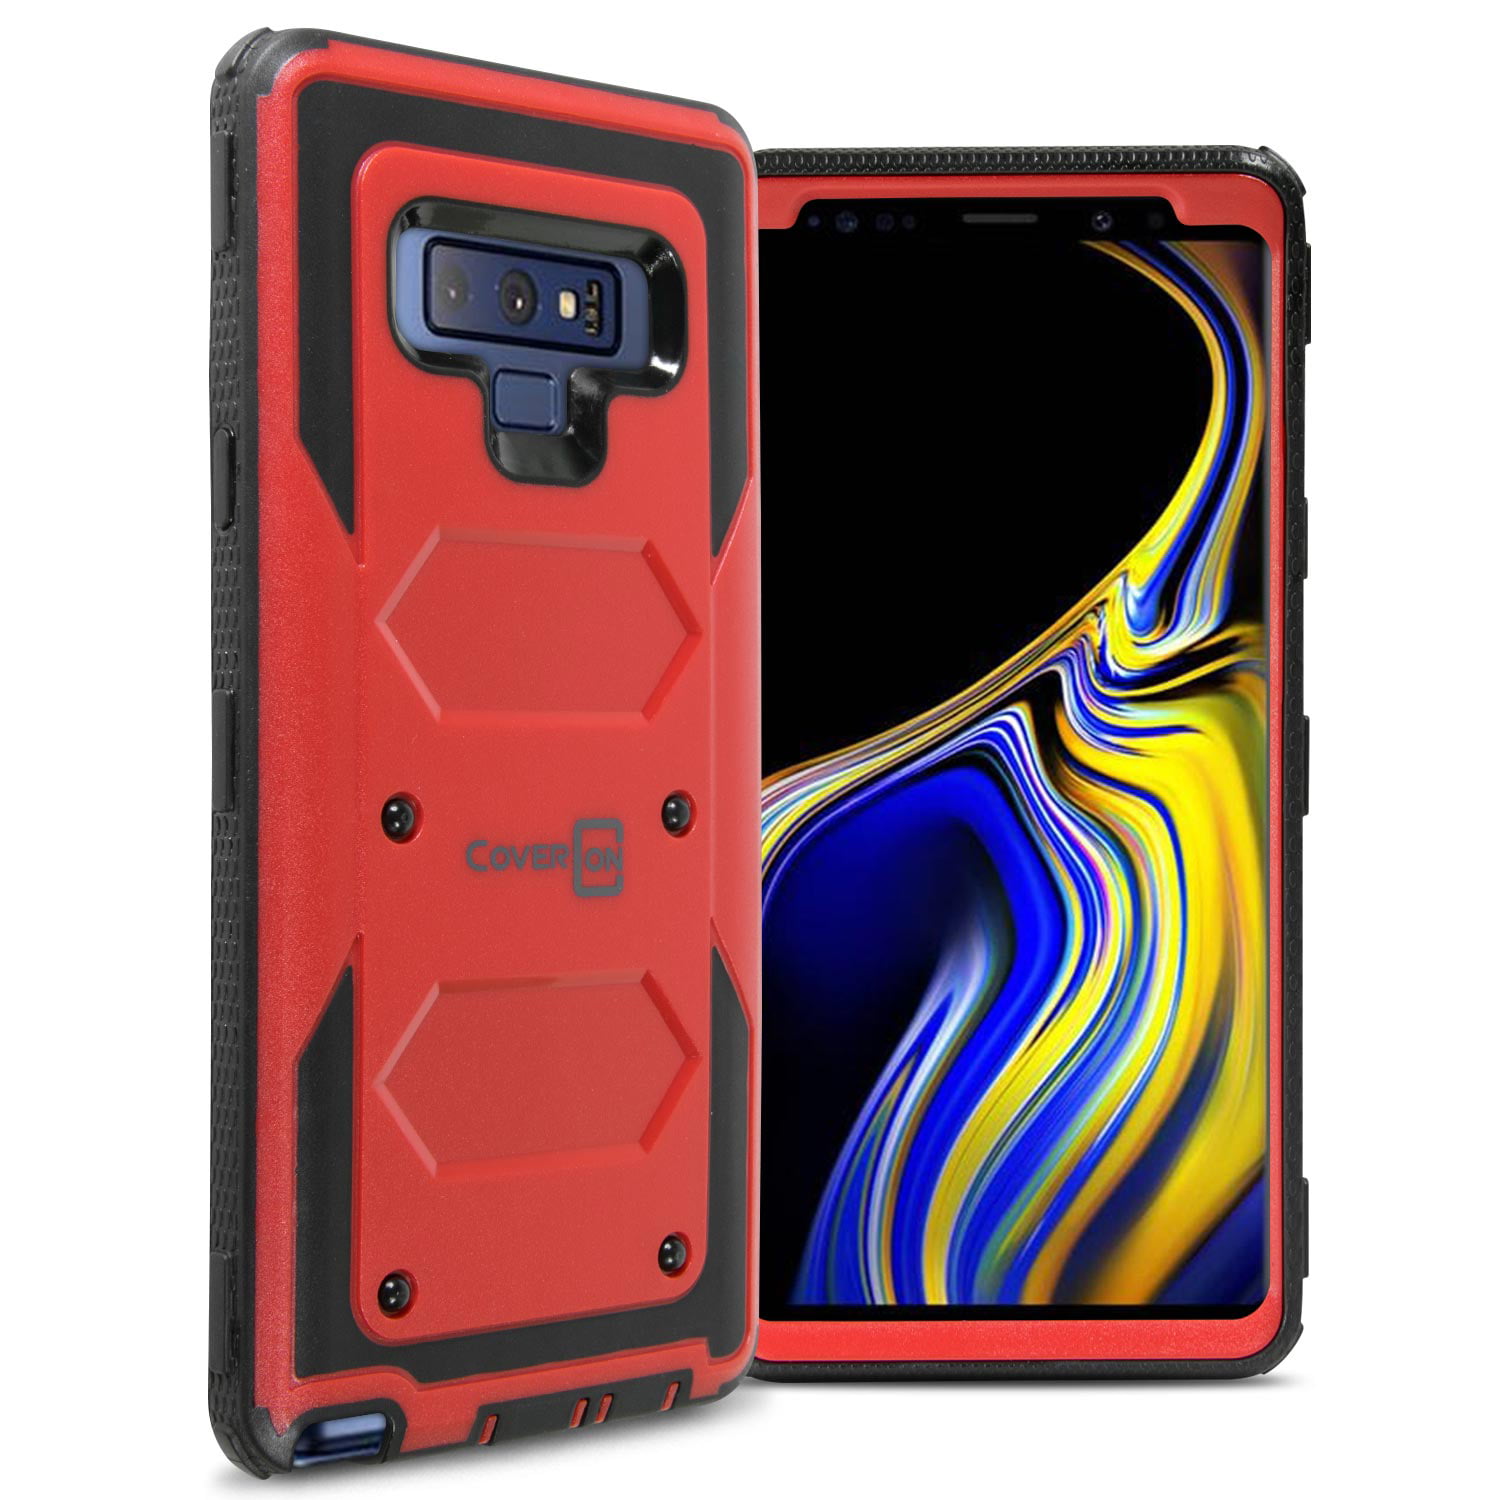 5 Day Note 9 workout case for Push Pull Legs